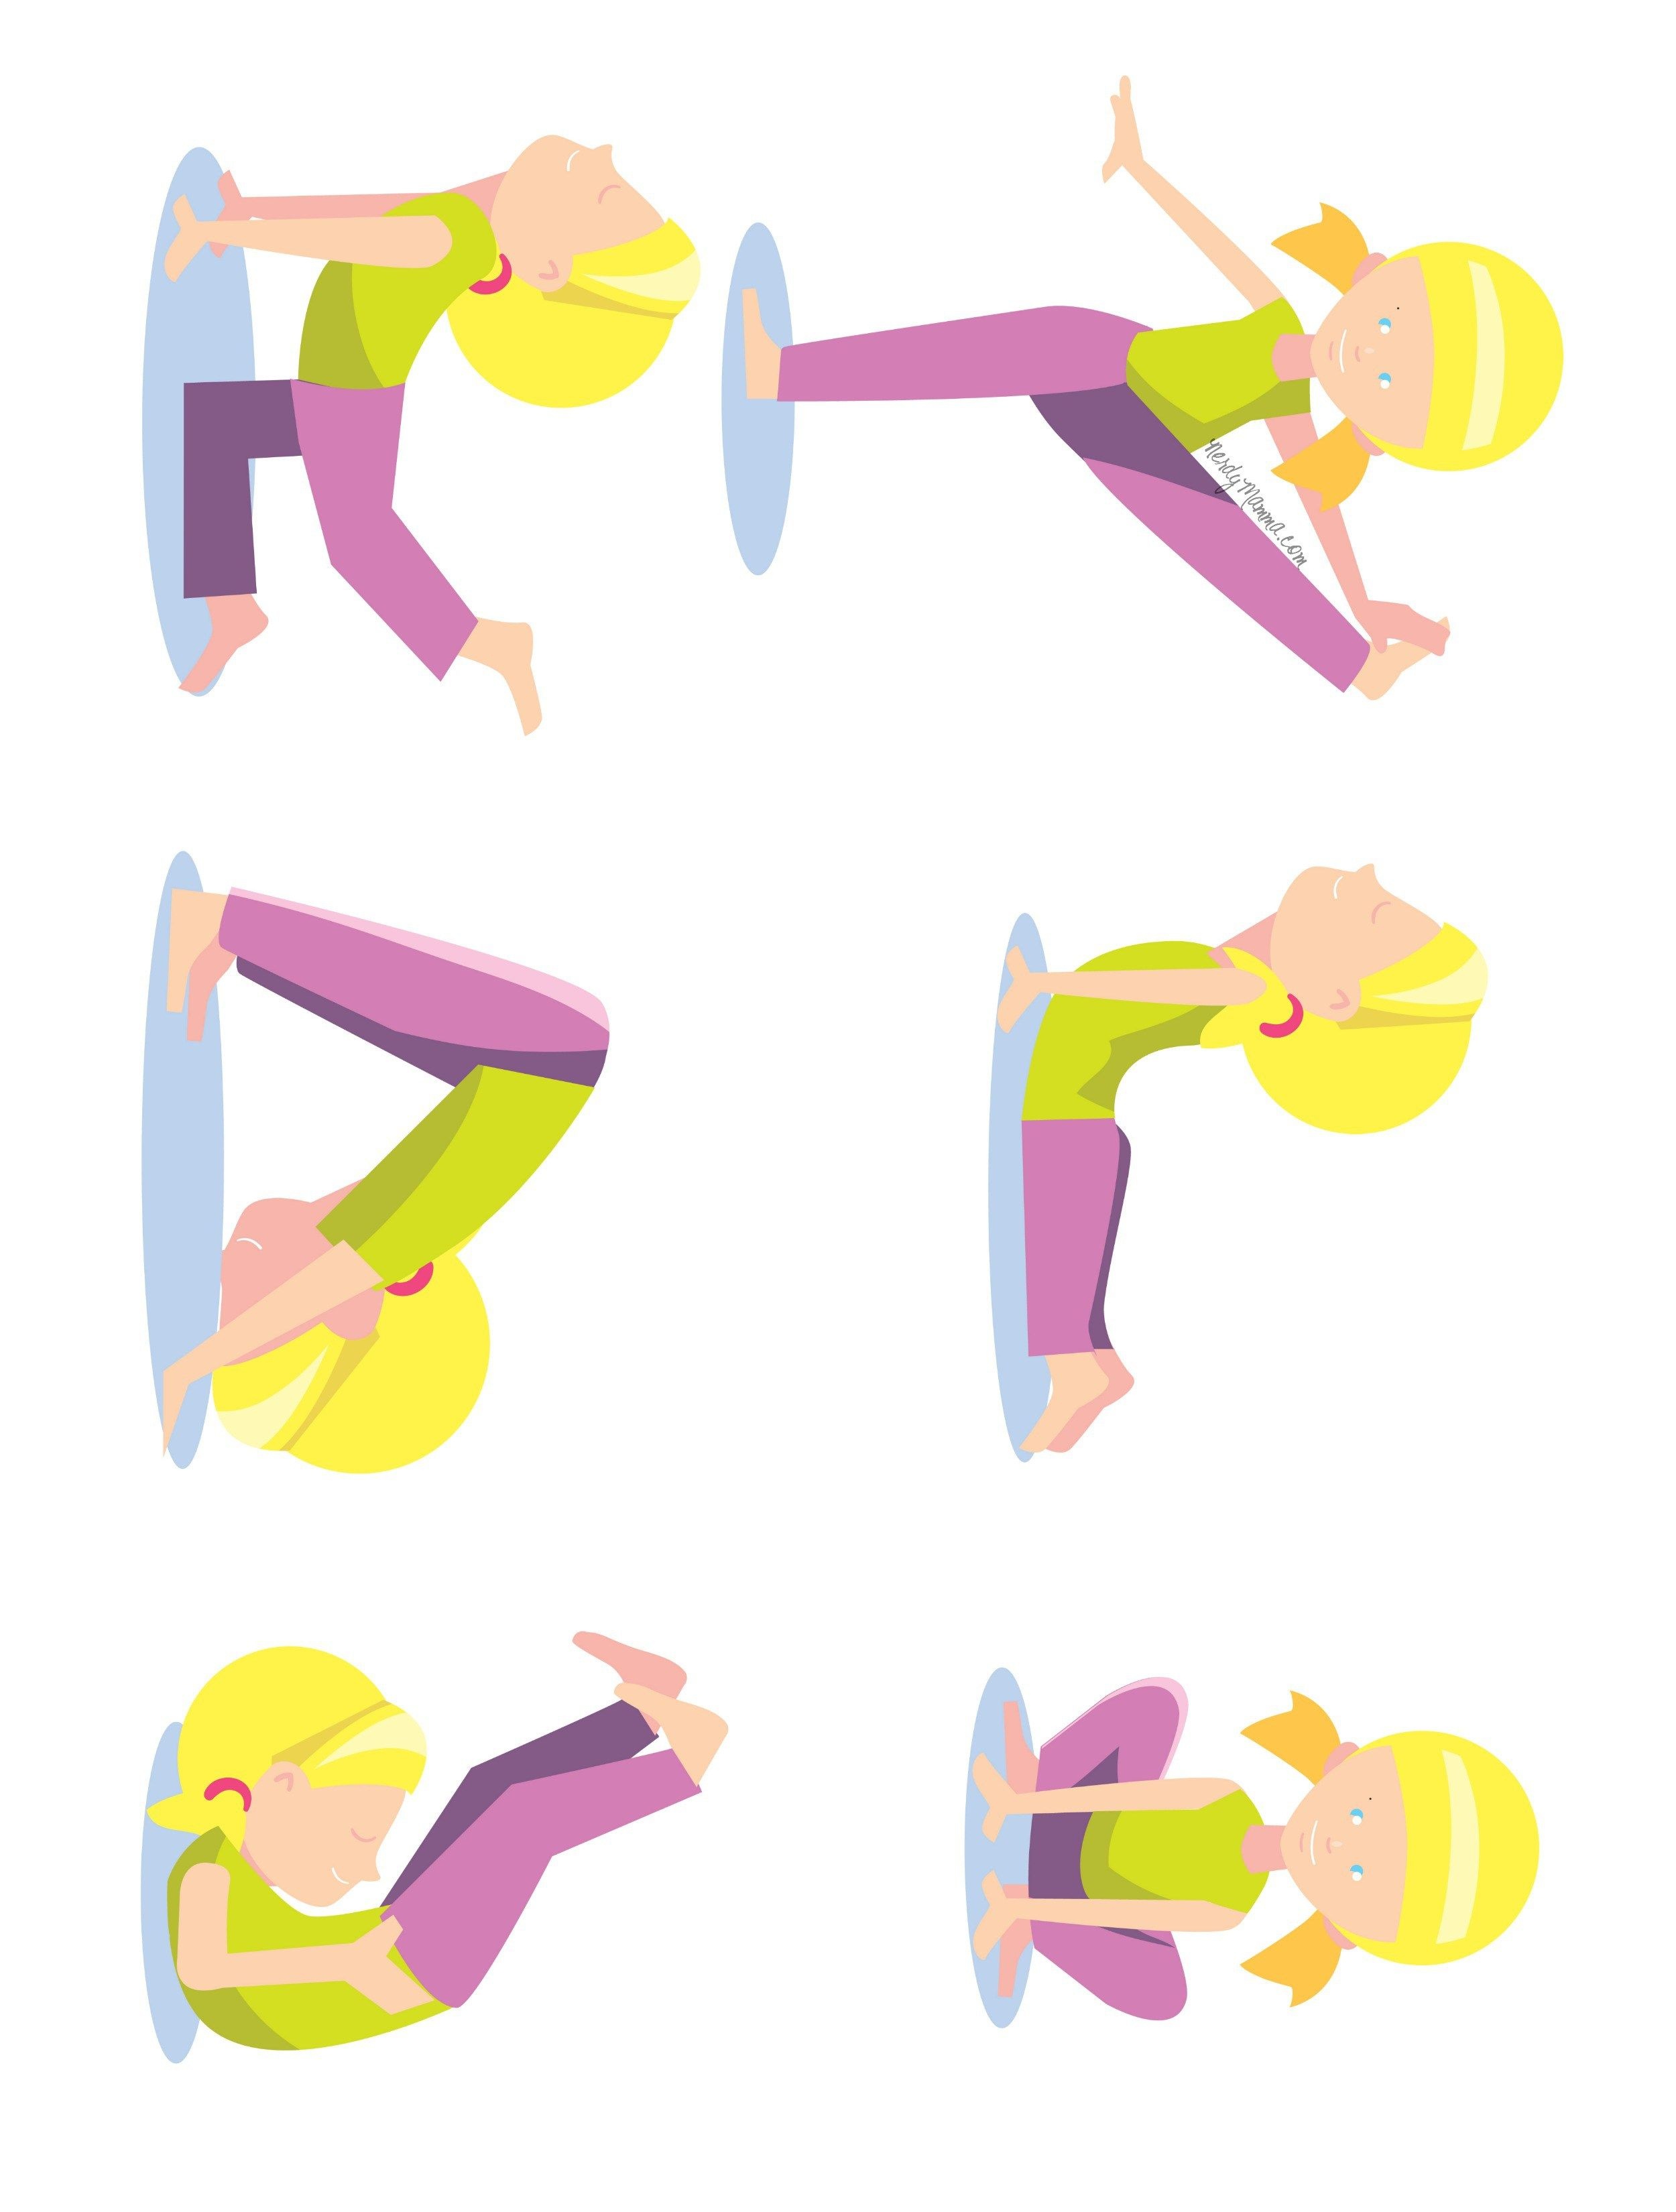 6 Easy Yoga Poses That Toddlers Can Do Free Printable | Yoga &amp; Barre - Free Printable Yoga Poses